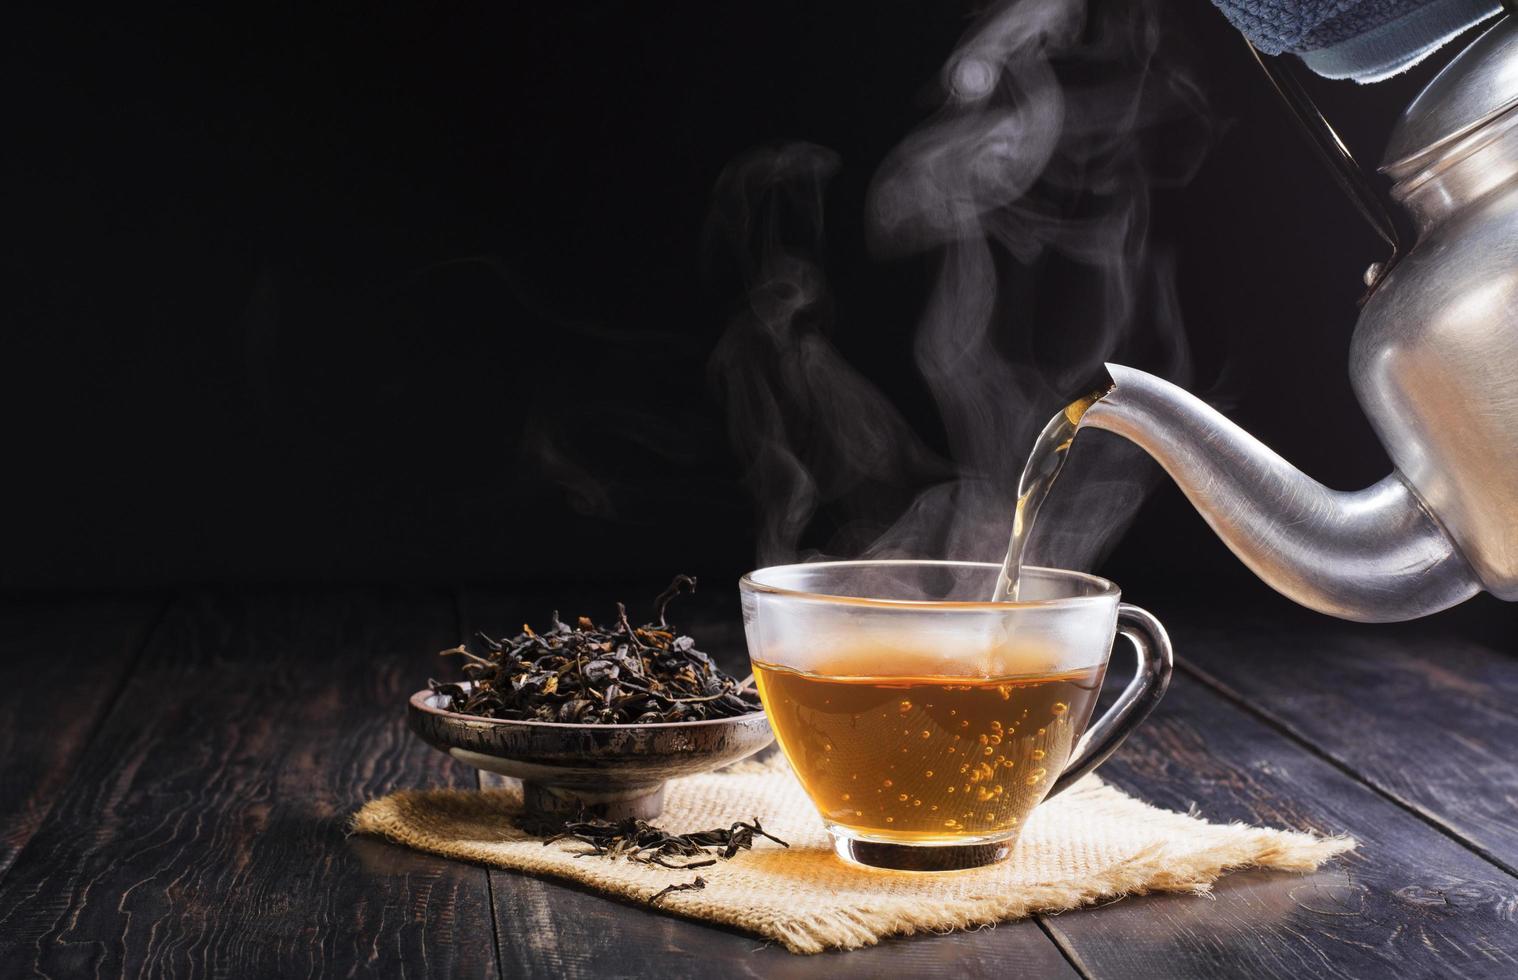 Pour the hot herbal teapot into a glass cup. Teacup is placed on a black wooden table on dark background. The sunlight of the new morning shines in the warm atmosphere. photo